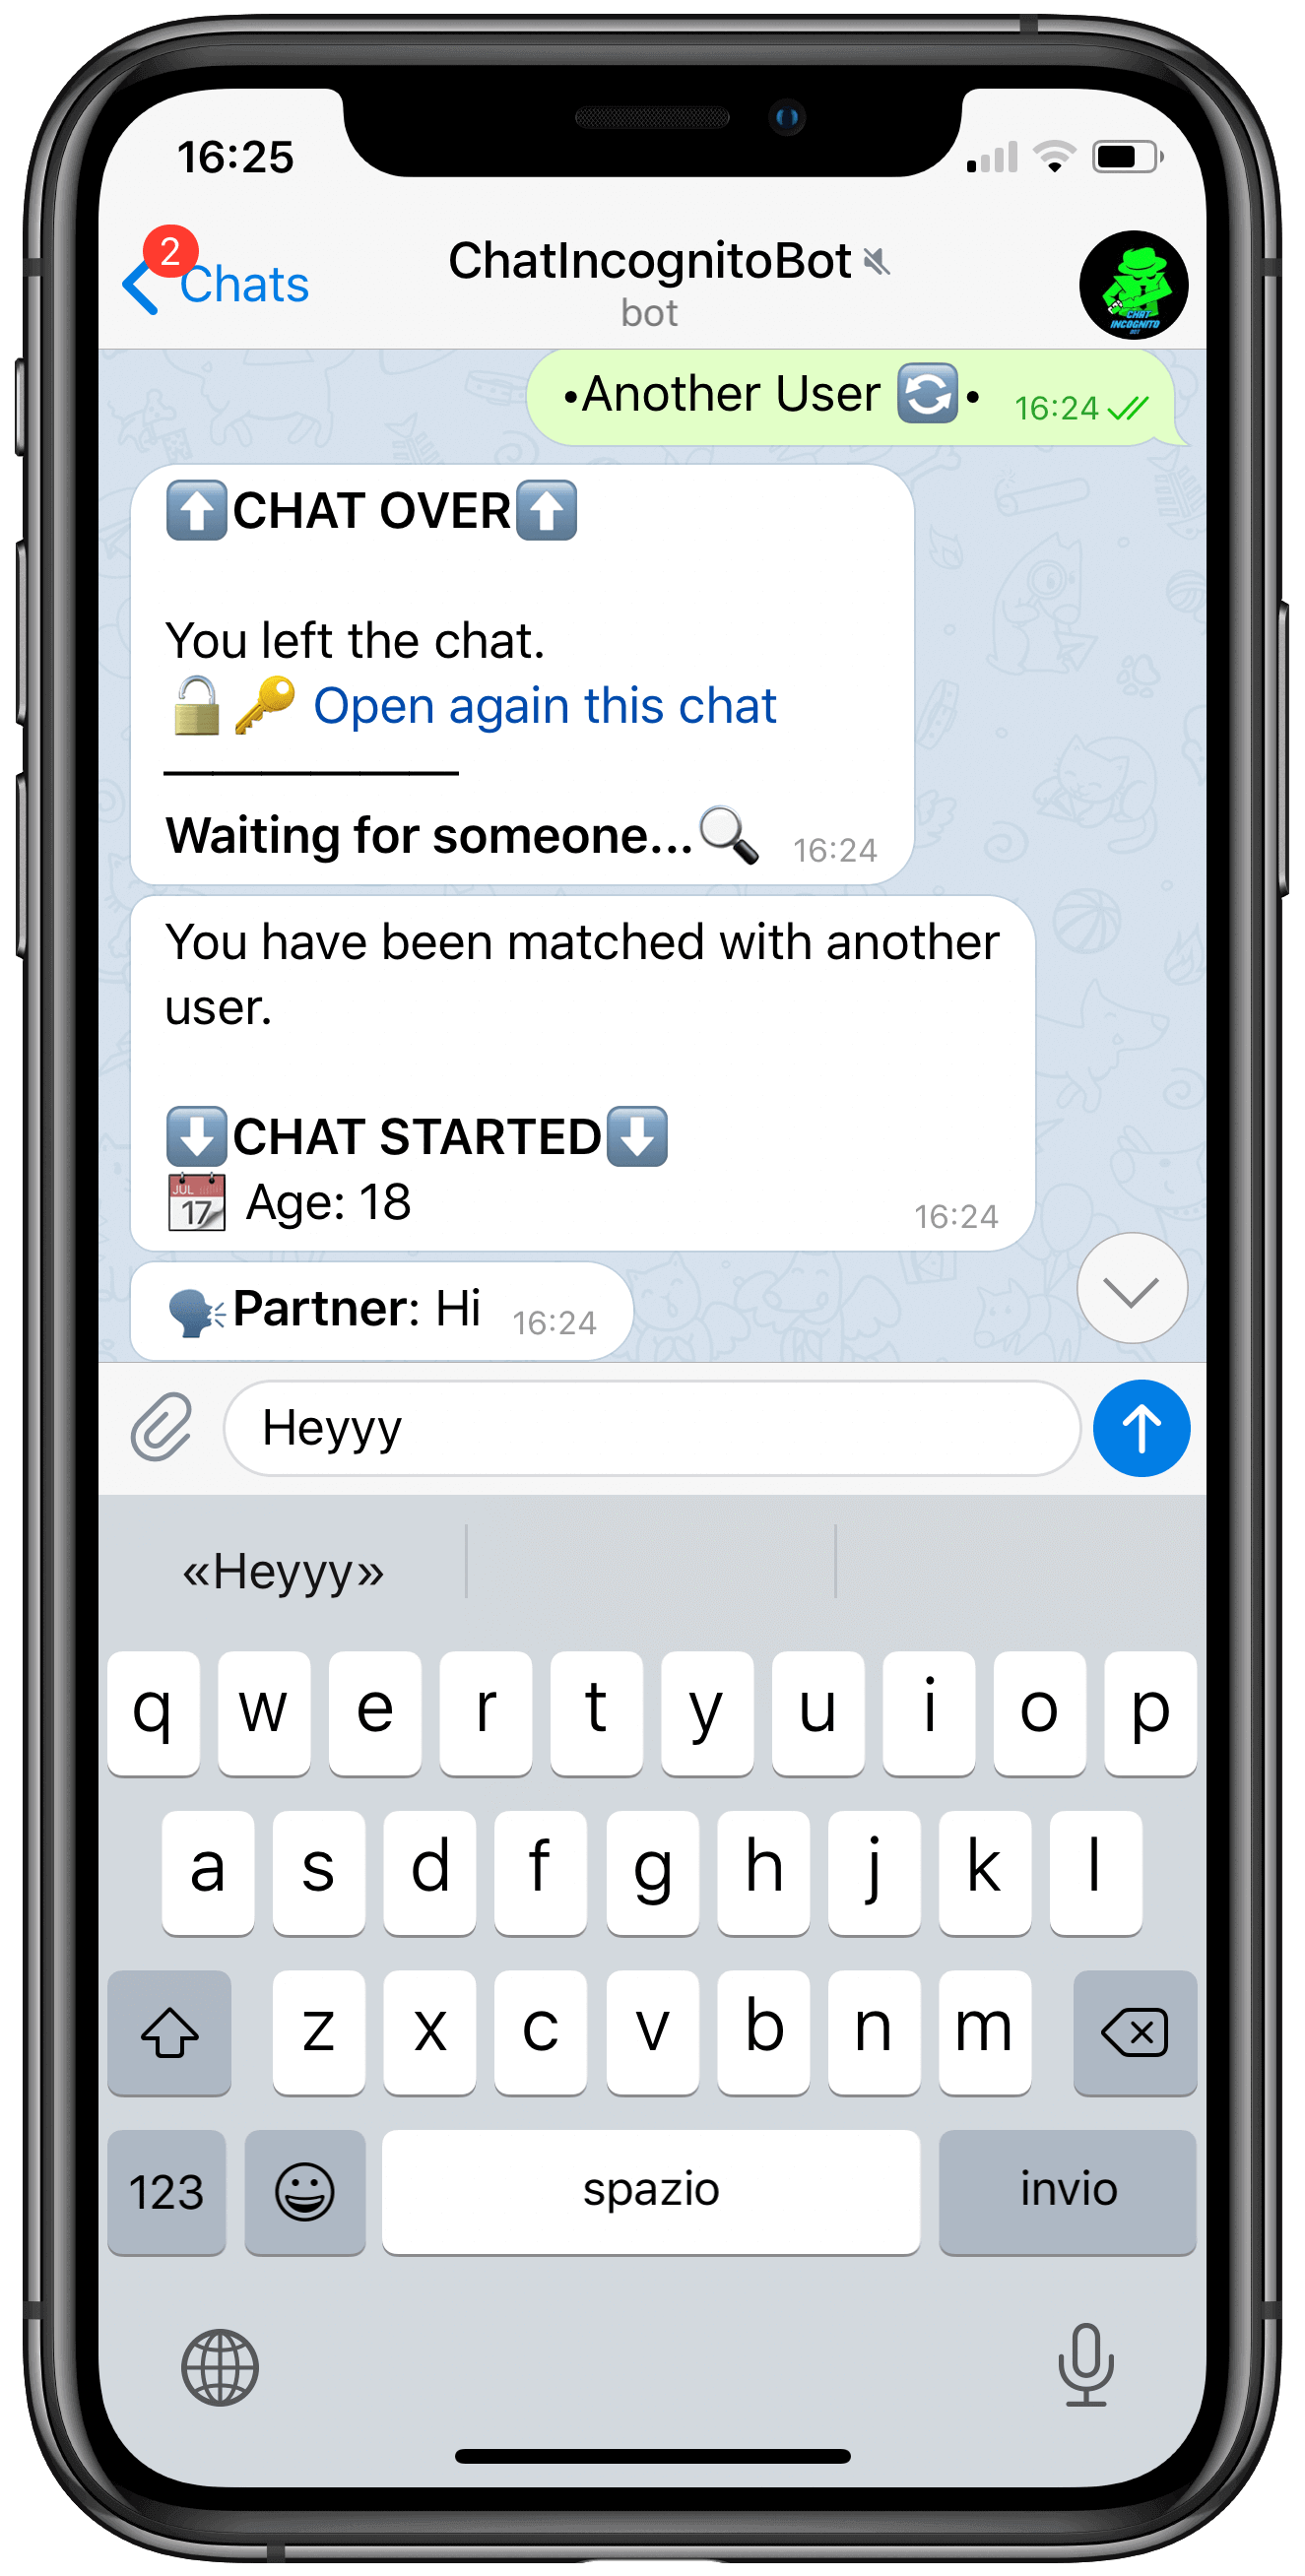 new chat on ChatIncognitoBot